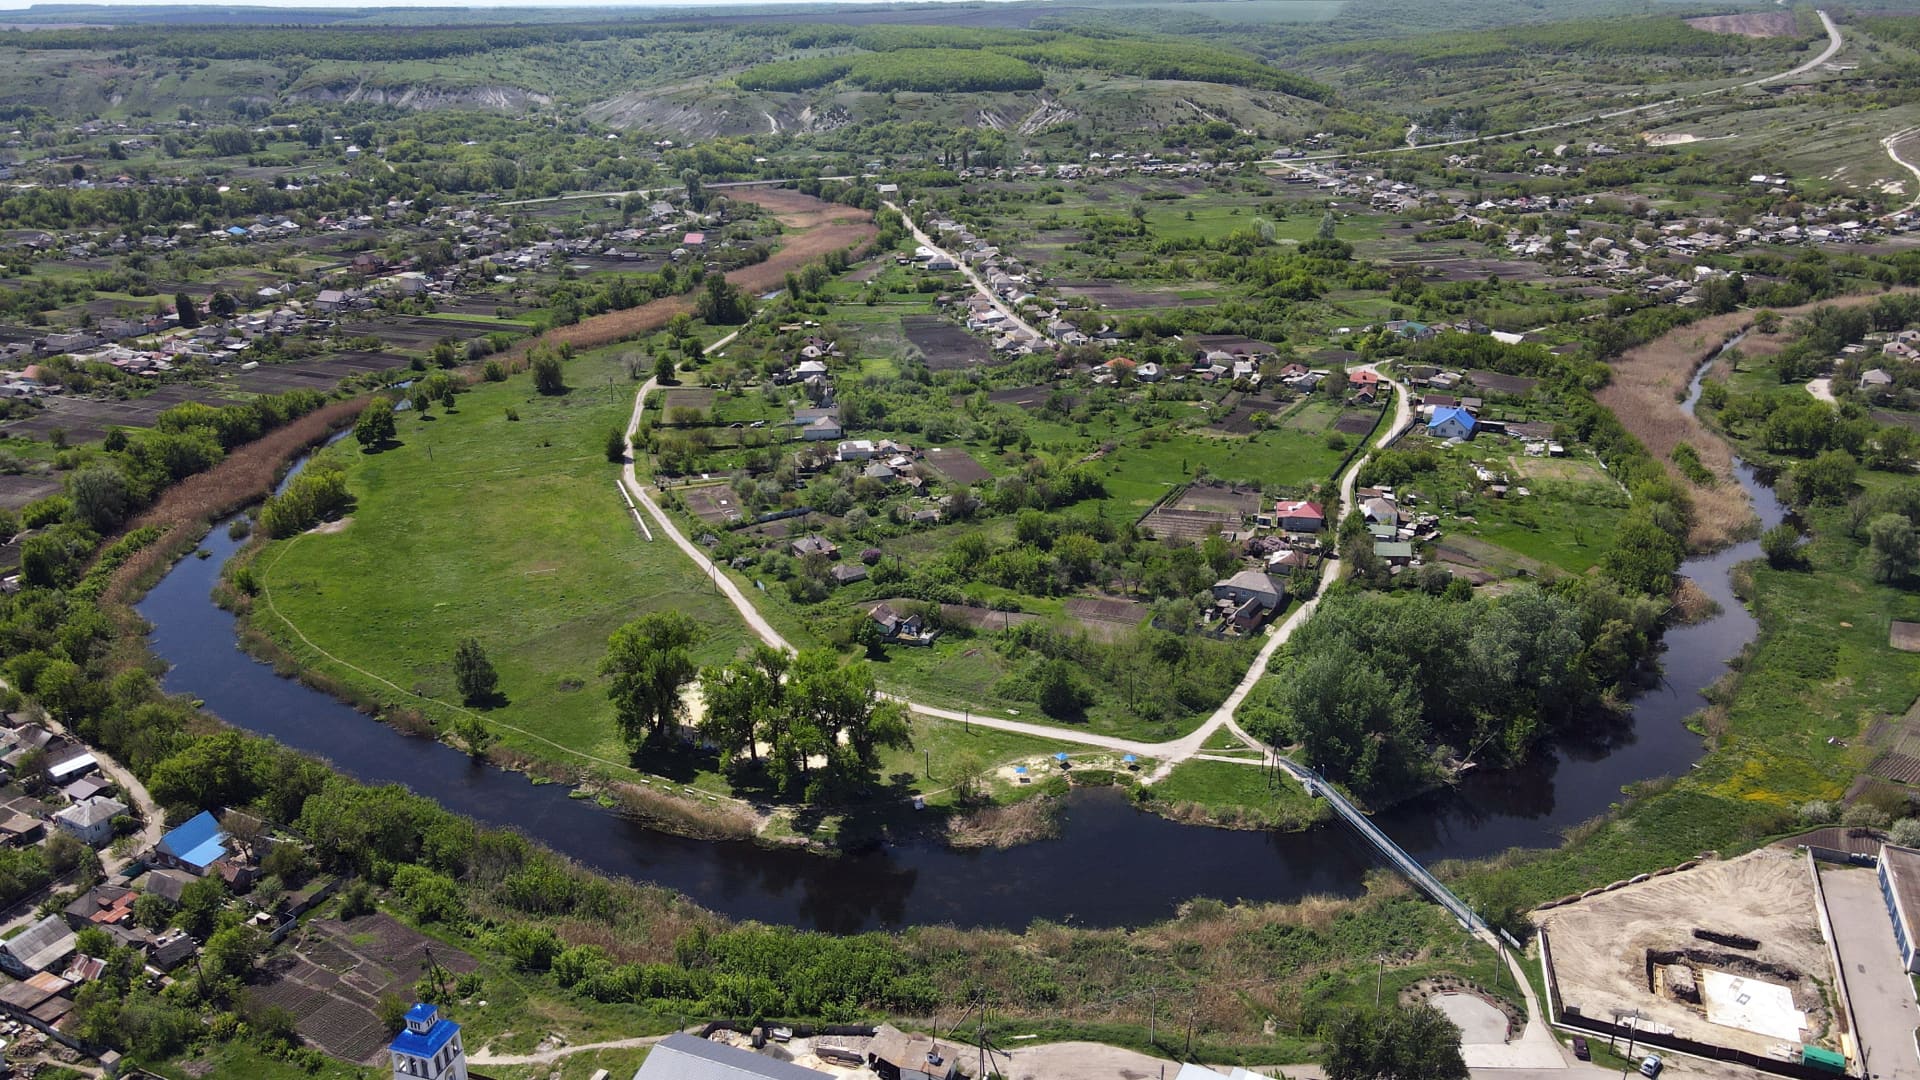 An aerial view of Svatove city, in the Luhansk region of eastern Ukraine. The British Ministry of Defense said Ukrainian formations can now approach the city to strike Russian supplies.